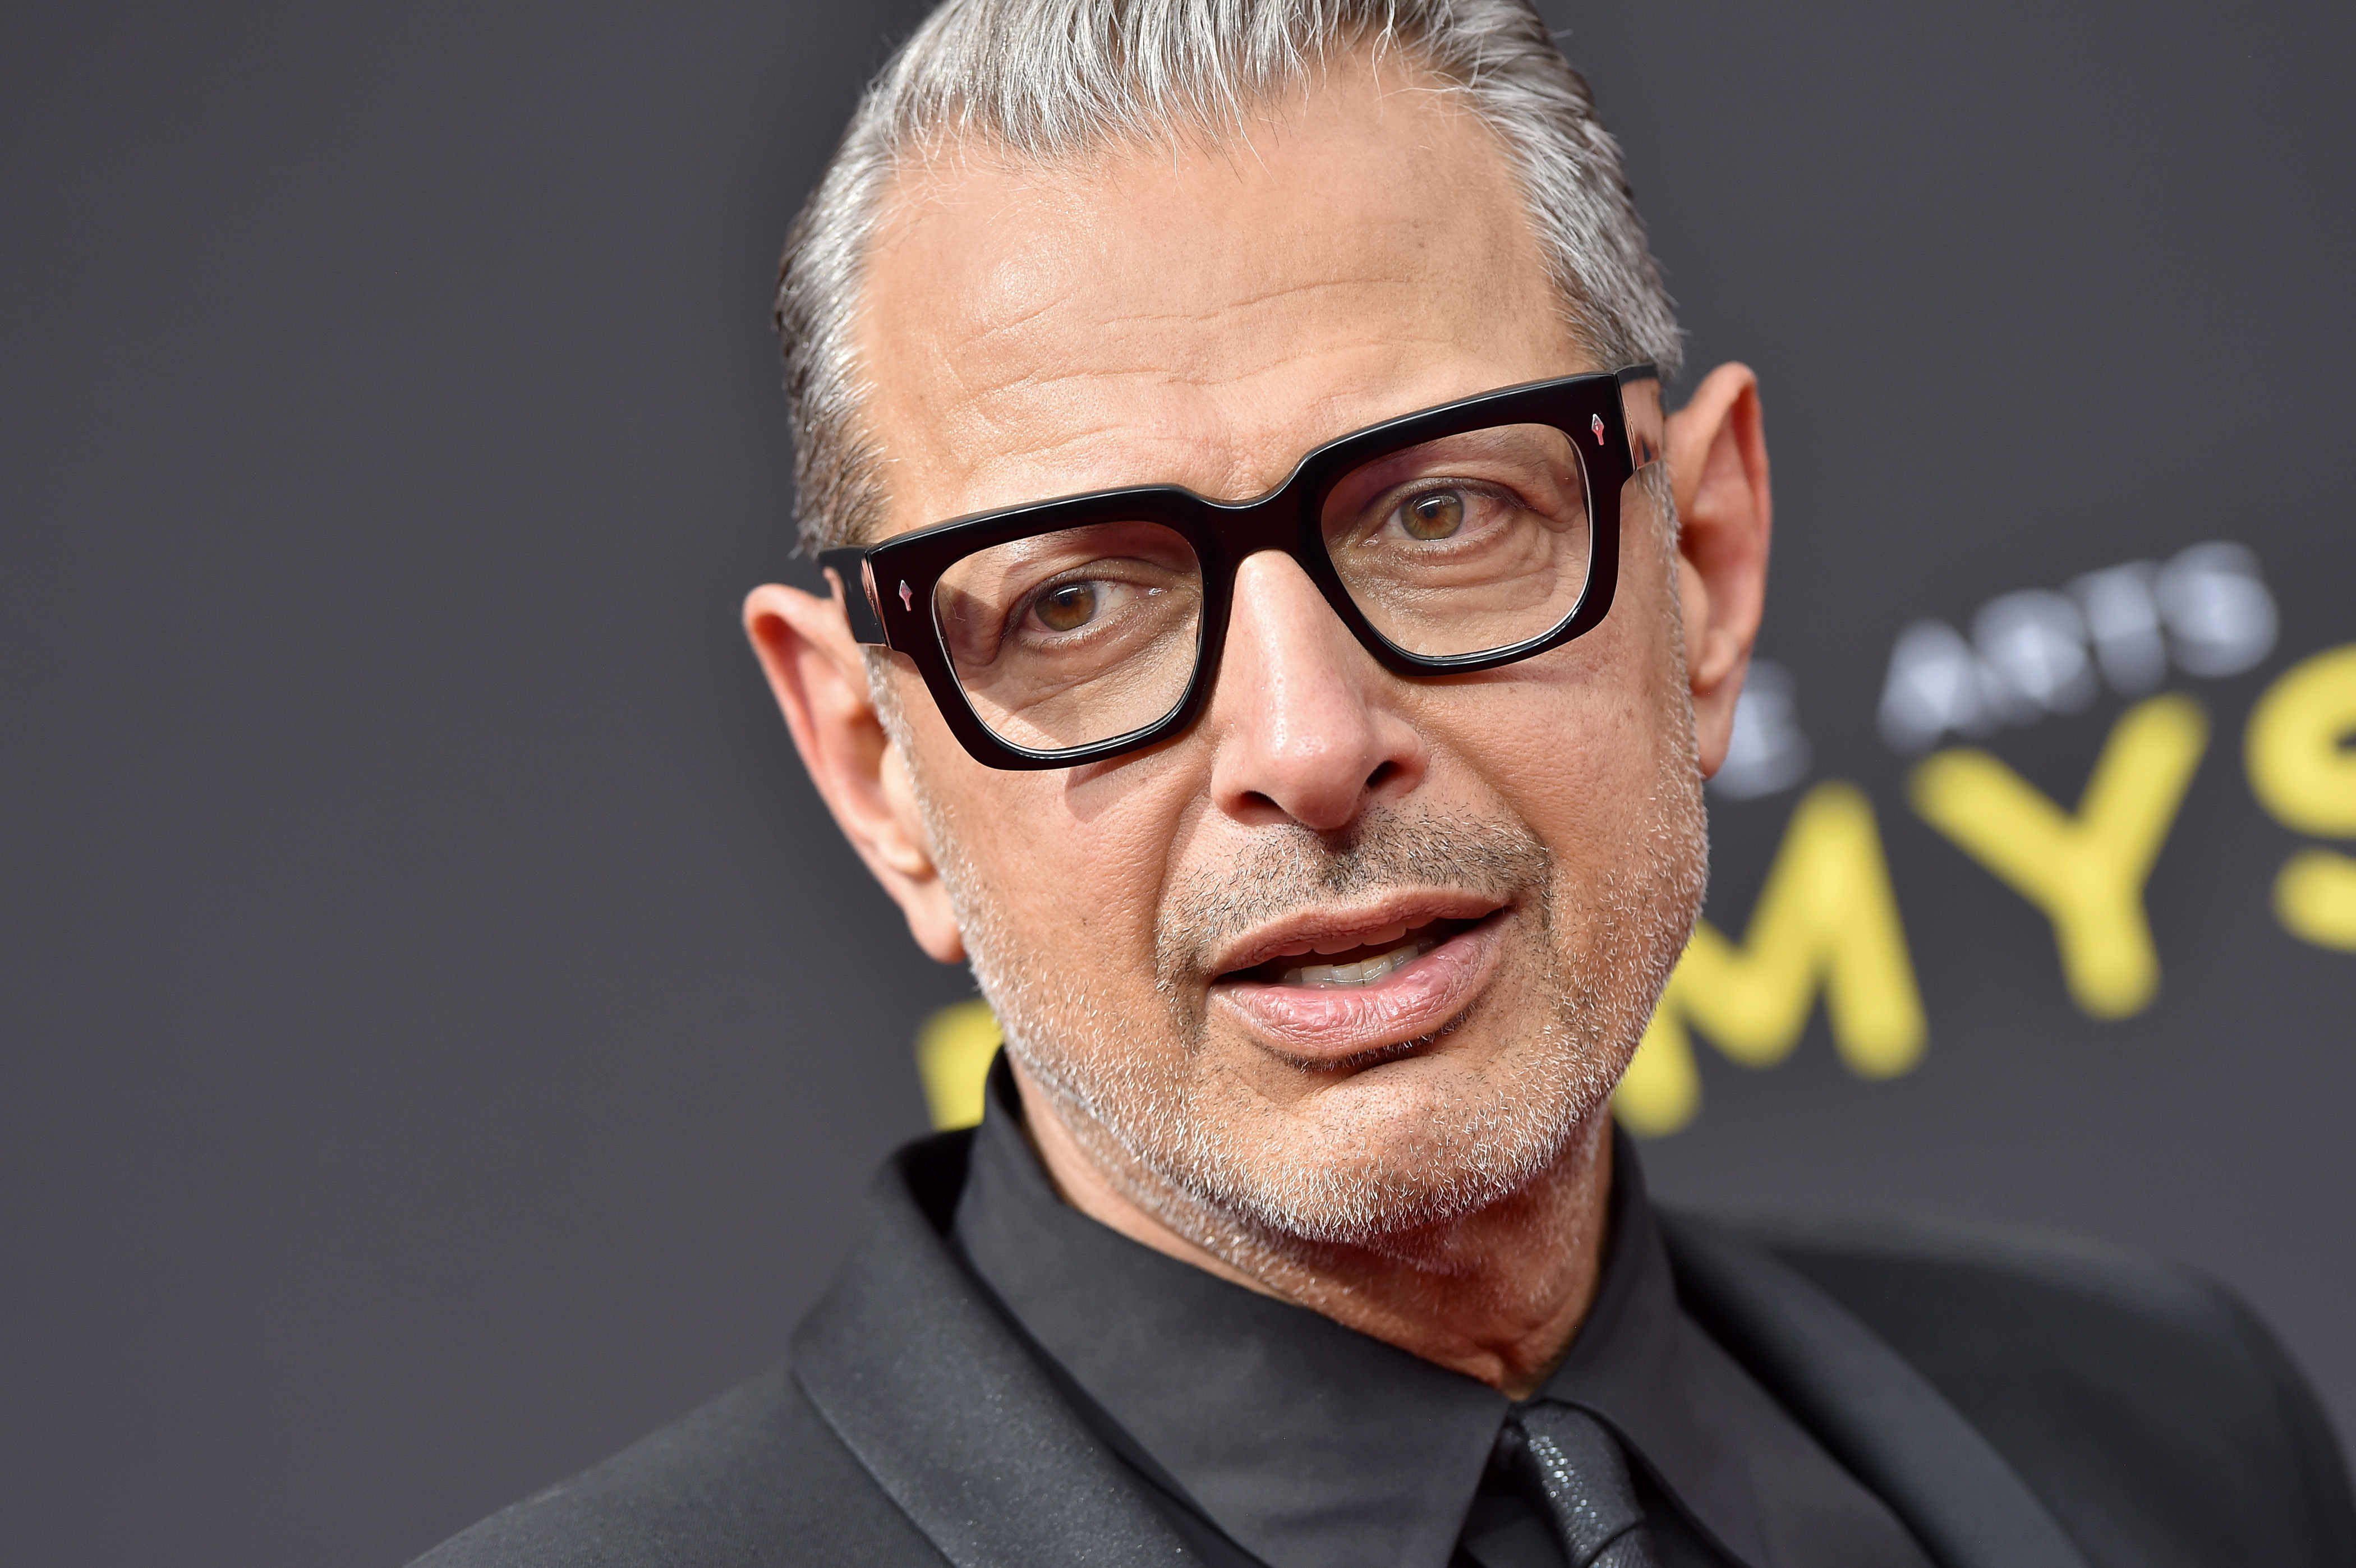 Jeff Goldblum reveals how 'cruel' dad sent his brother to gay cure therapy